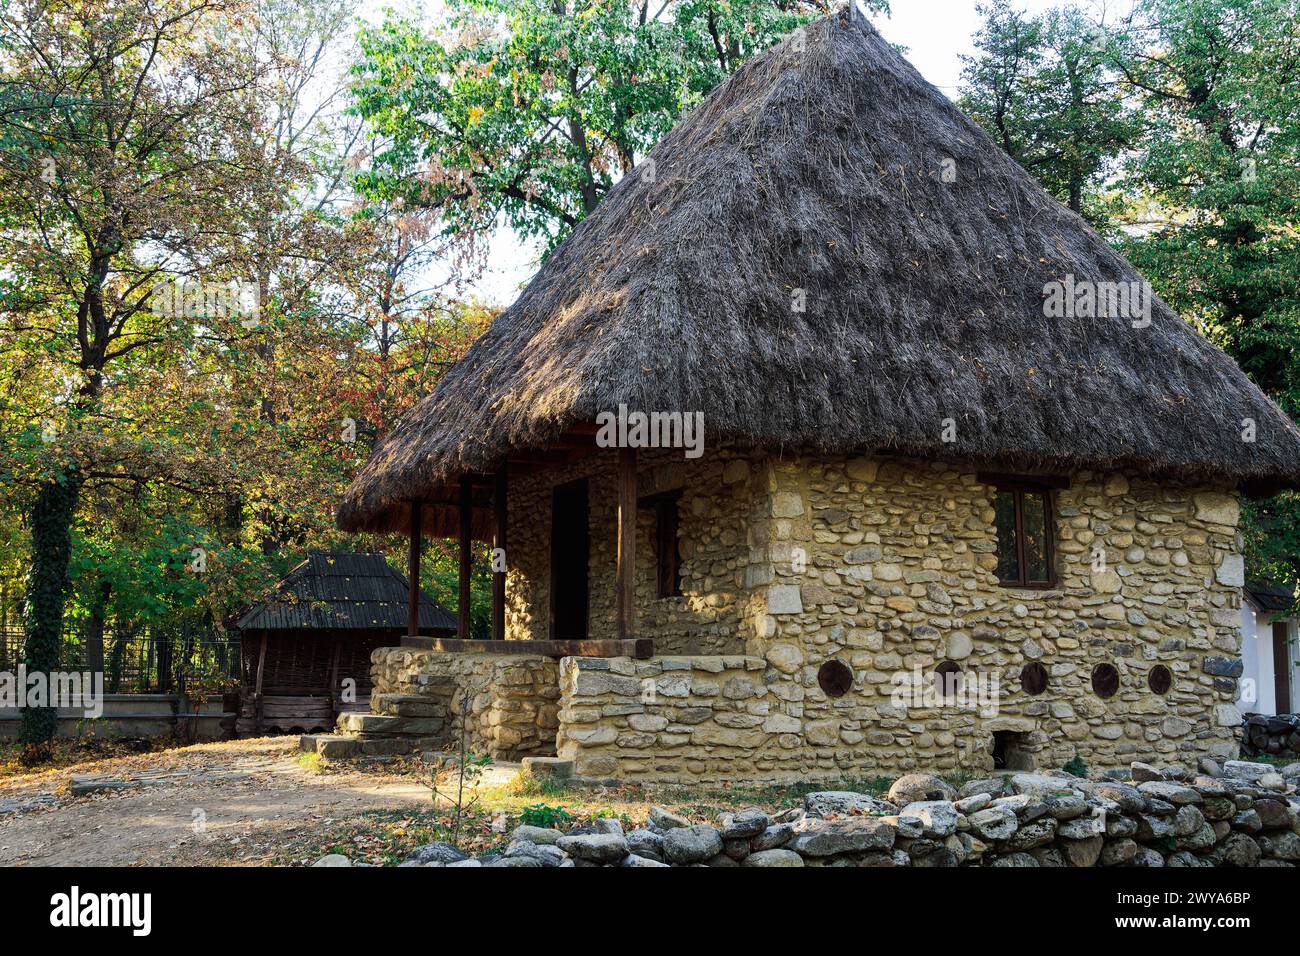 Authentic peasant settlements exhibiting traditional Romanian village life inside Dimitrie Gusti National Village Museum, Bucharest, Romania, Europe C Stock Photo